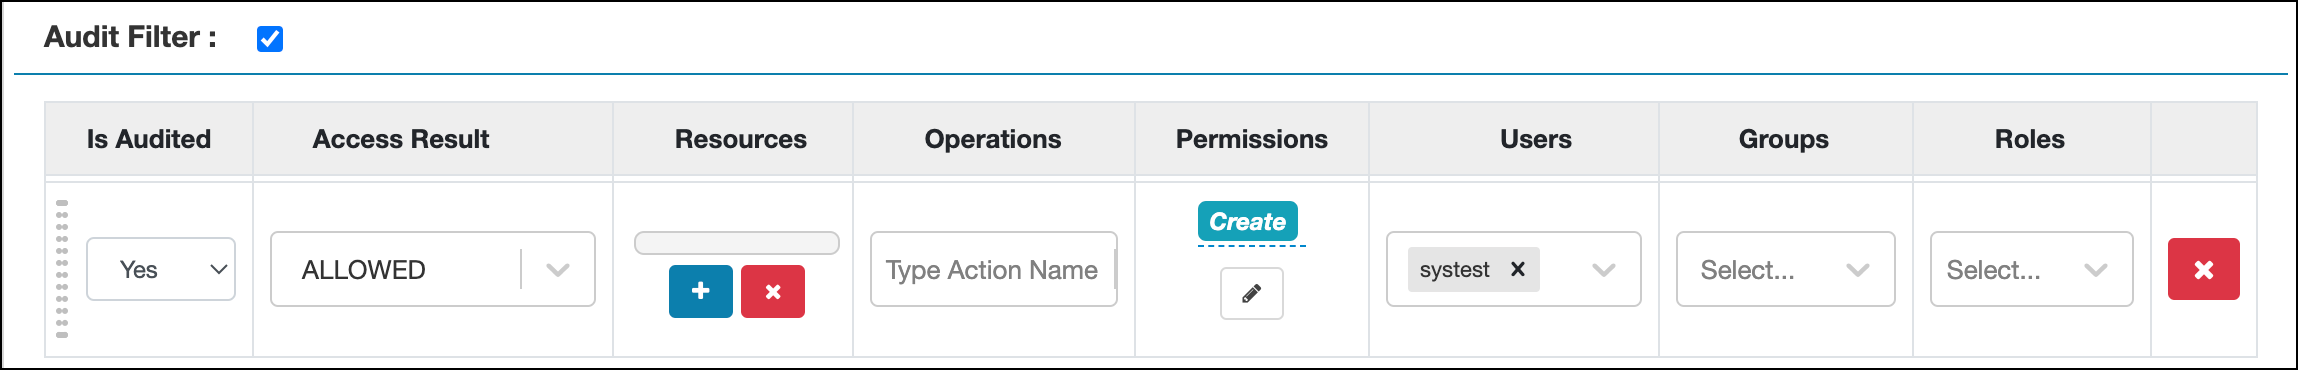 Adding an audit filter that excludes user systest access=Allowed logs for Hive service